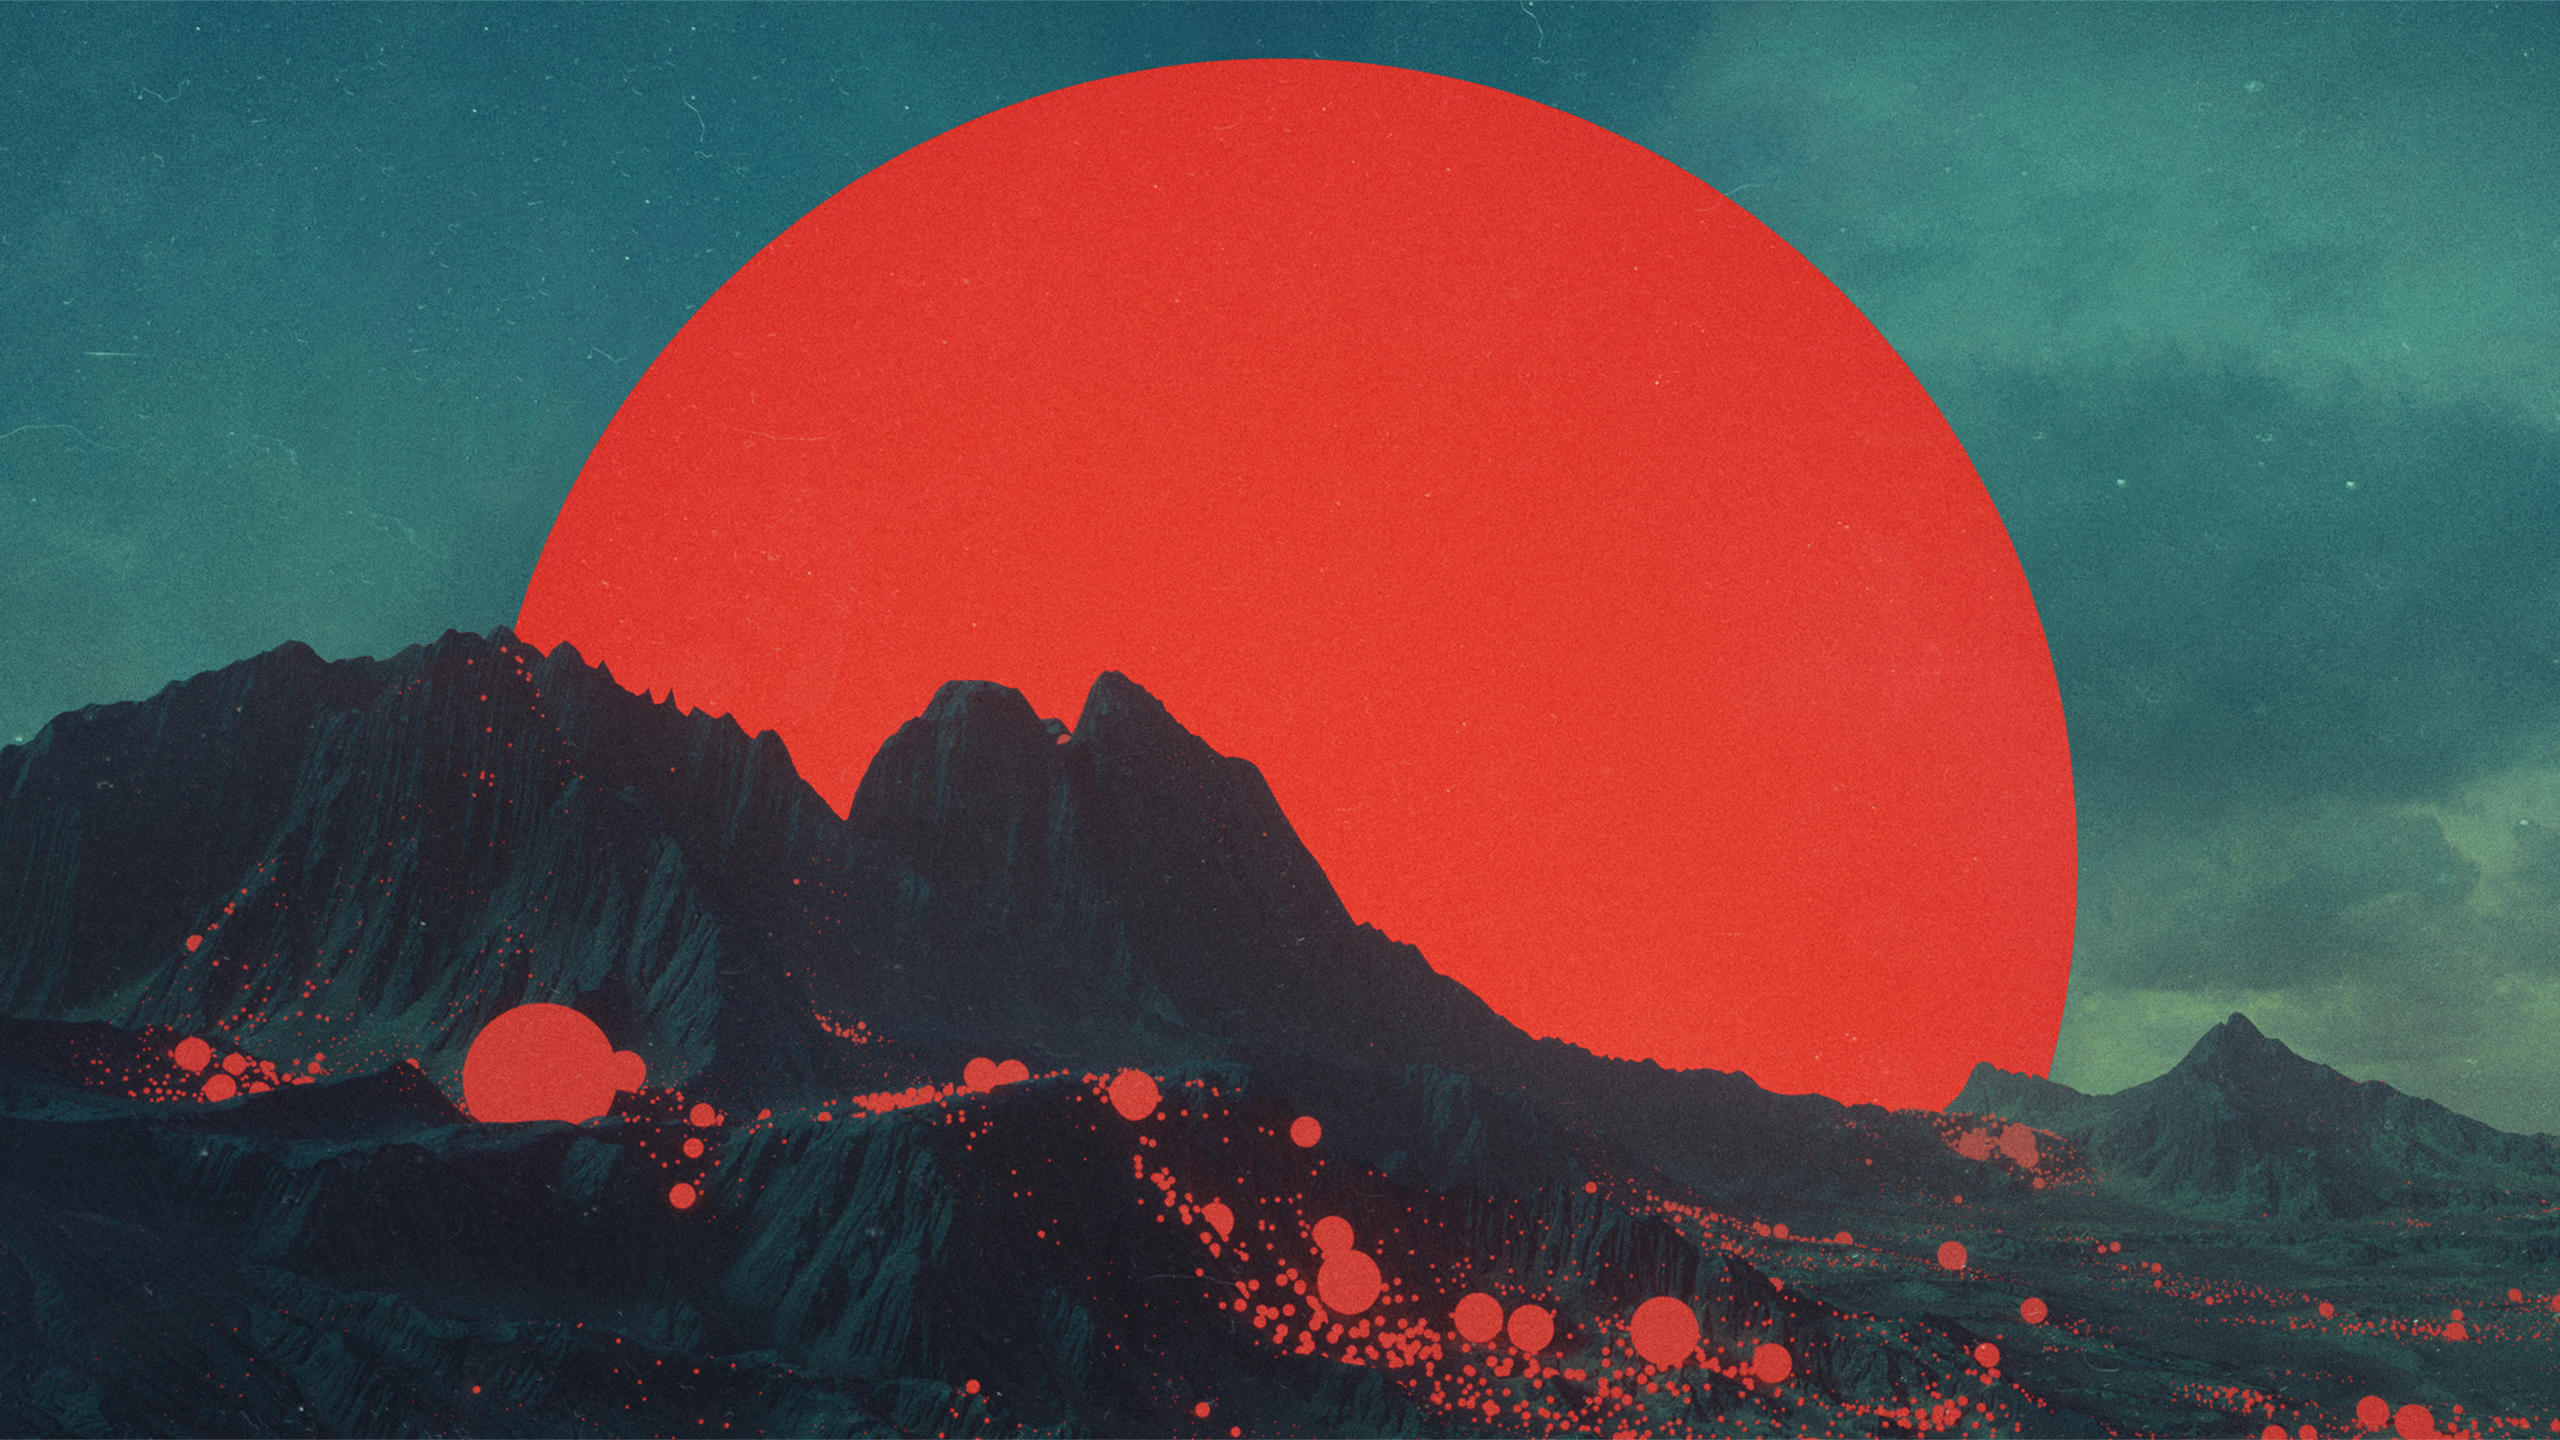 Nature Moon Red Moon Digital Art Mountains Red 2560x1440